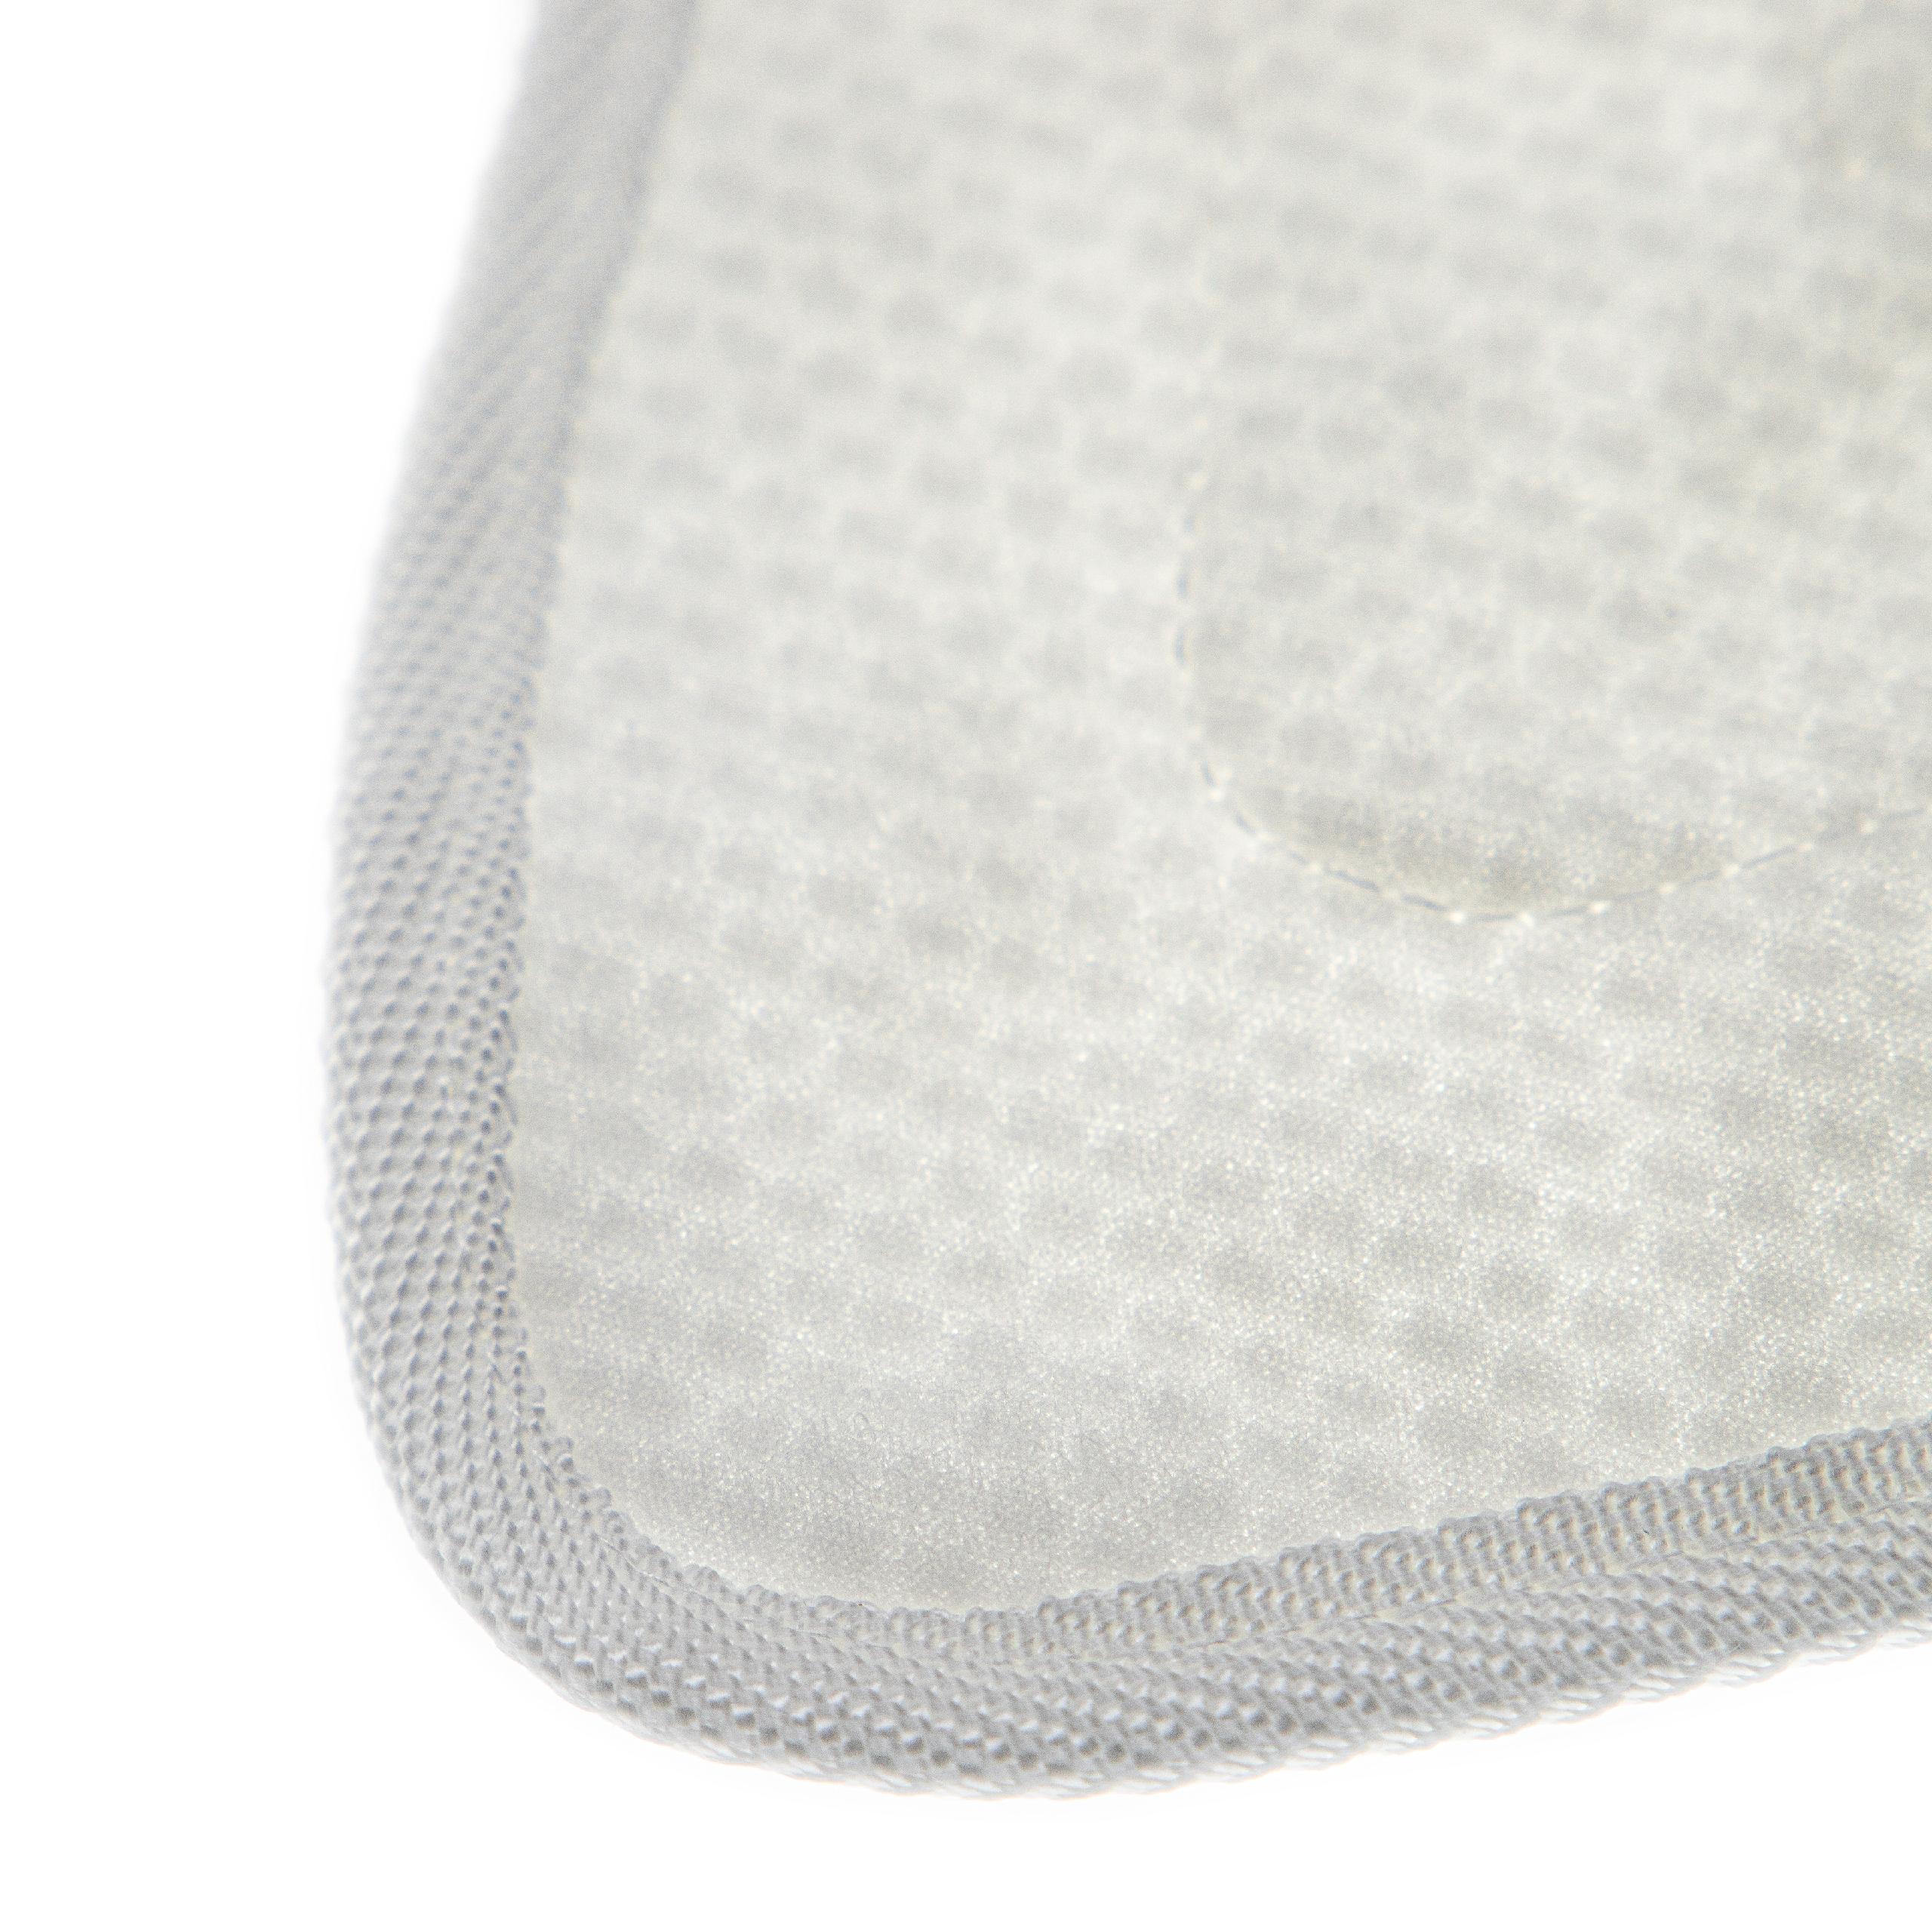 4x Cleaning Pad replaces Vileda 146576 for ViledaHot Spray Steamer, Steam Mop - Microfibre White